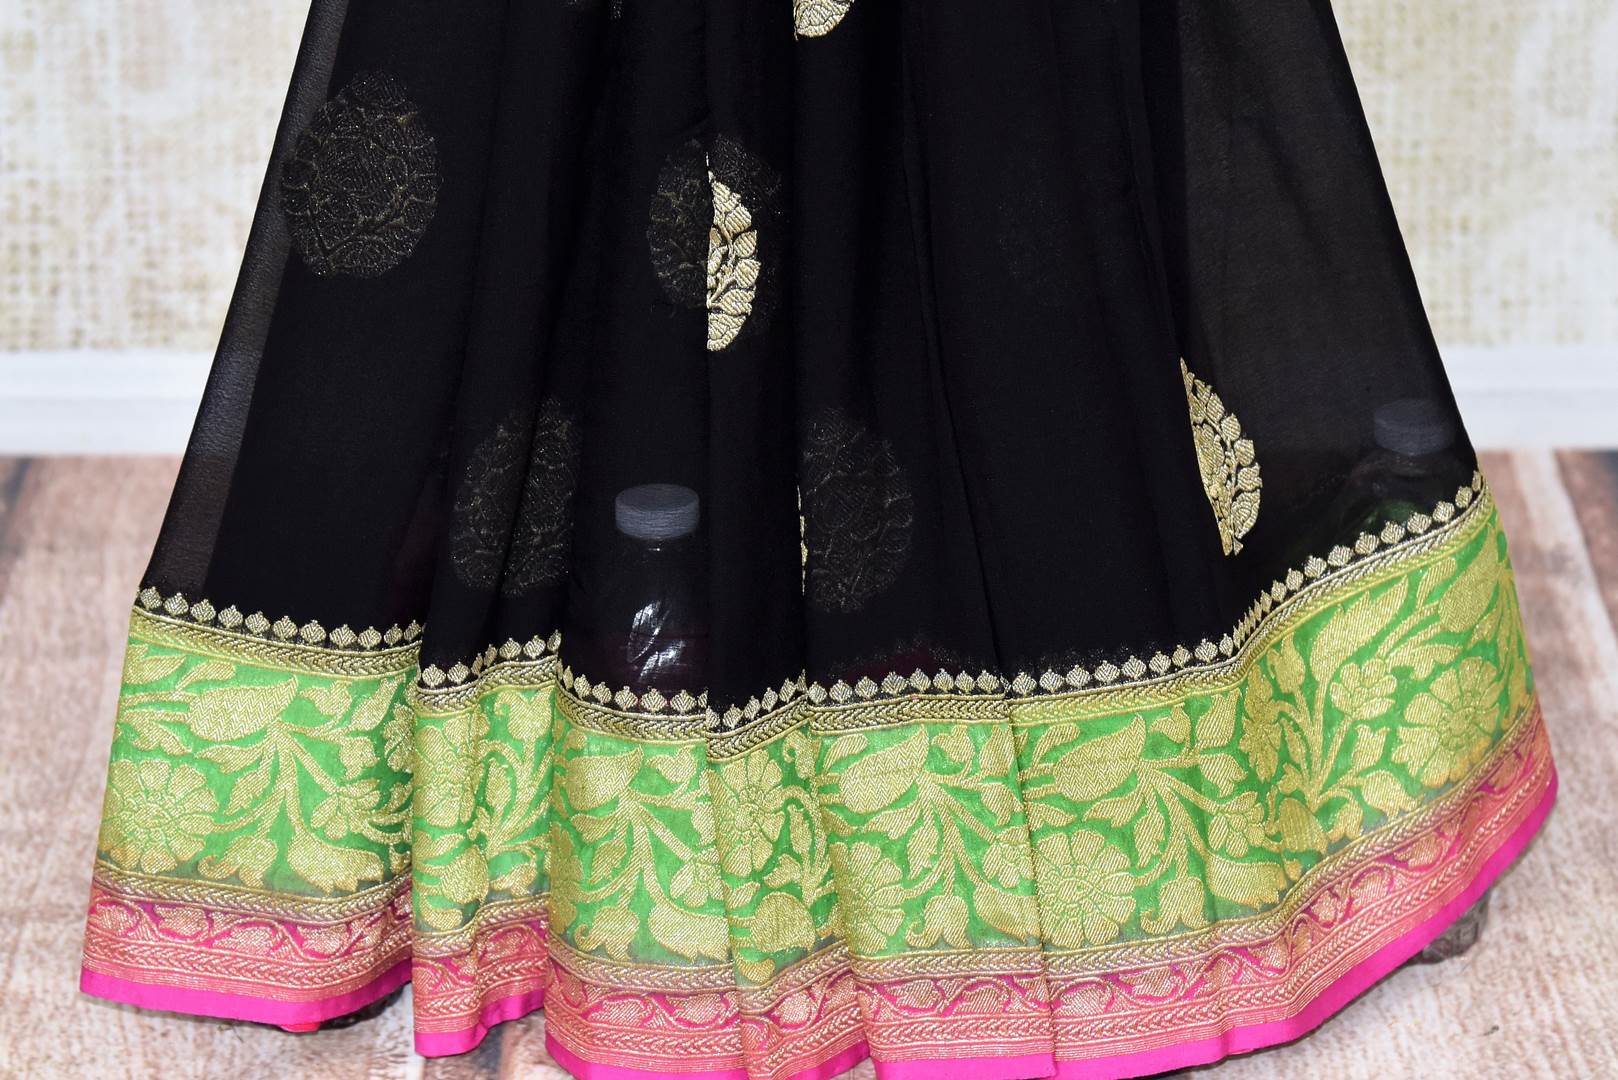 Shop black georgette Benarasi sari online in USA with green pink floral zari border from Pure Elegance online store. Visit our exclusive Indian clothing store in USA and get floored by a range of exquisite pure handloom sarees, Banarasi sarees, silk sarees, Indian jewelry and much more to complete your ethnic look.-pleats